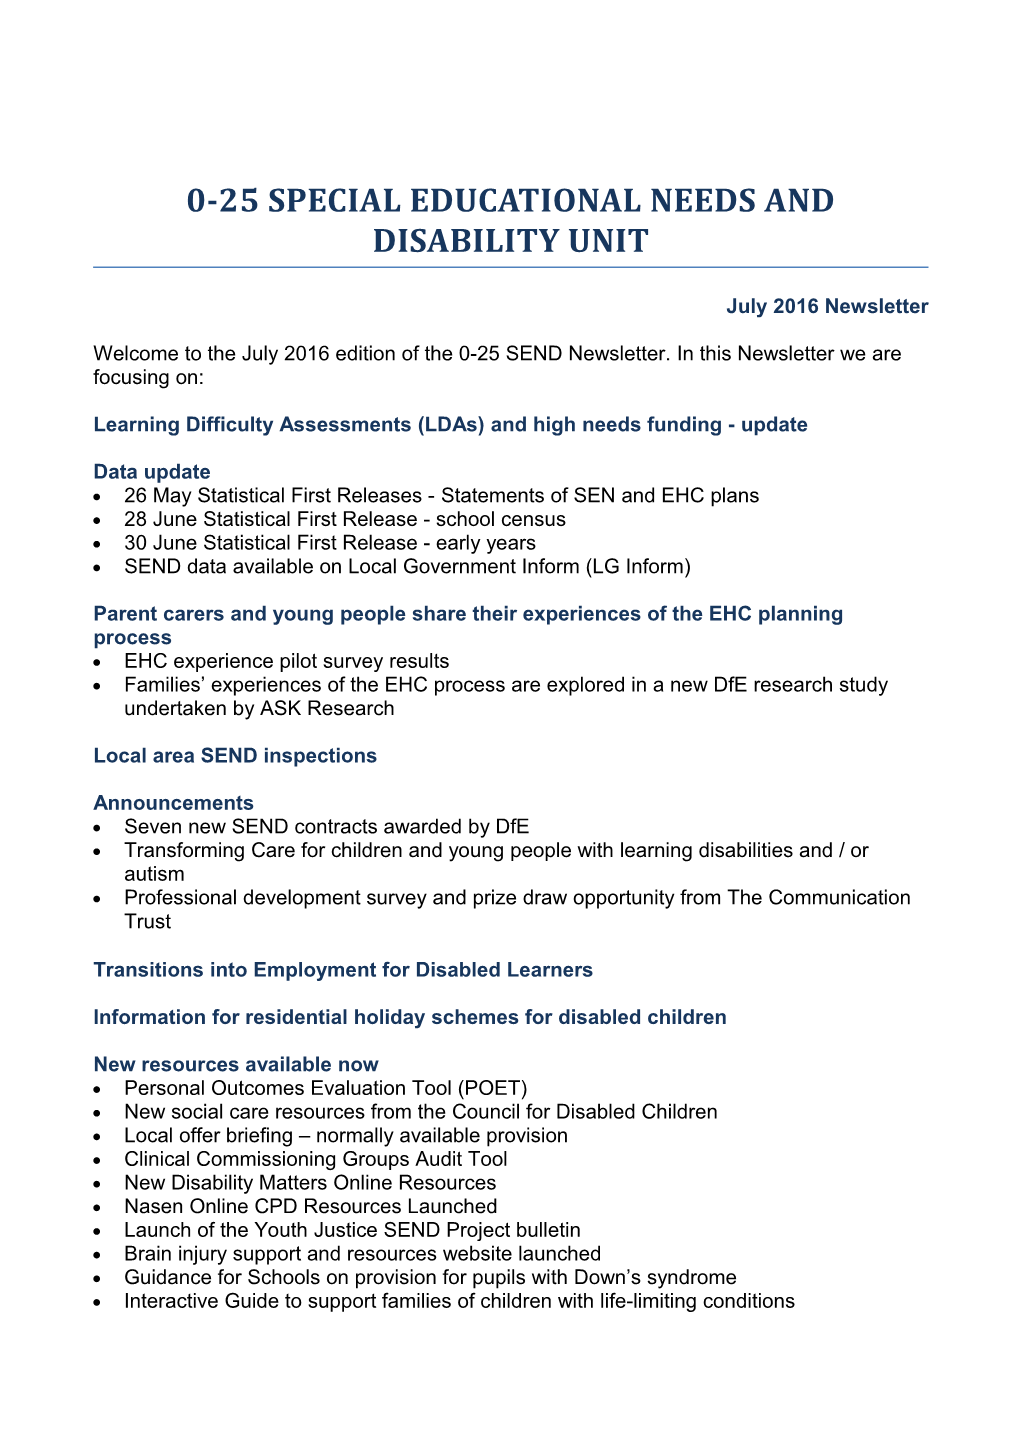 0-25 Special Educational Needs and Disability Unit